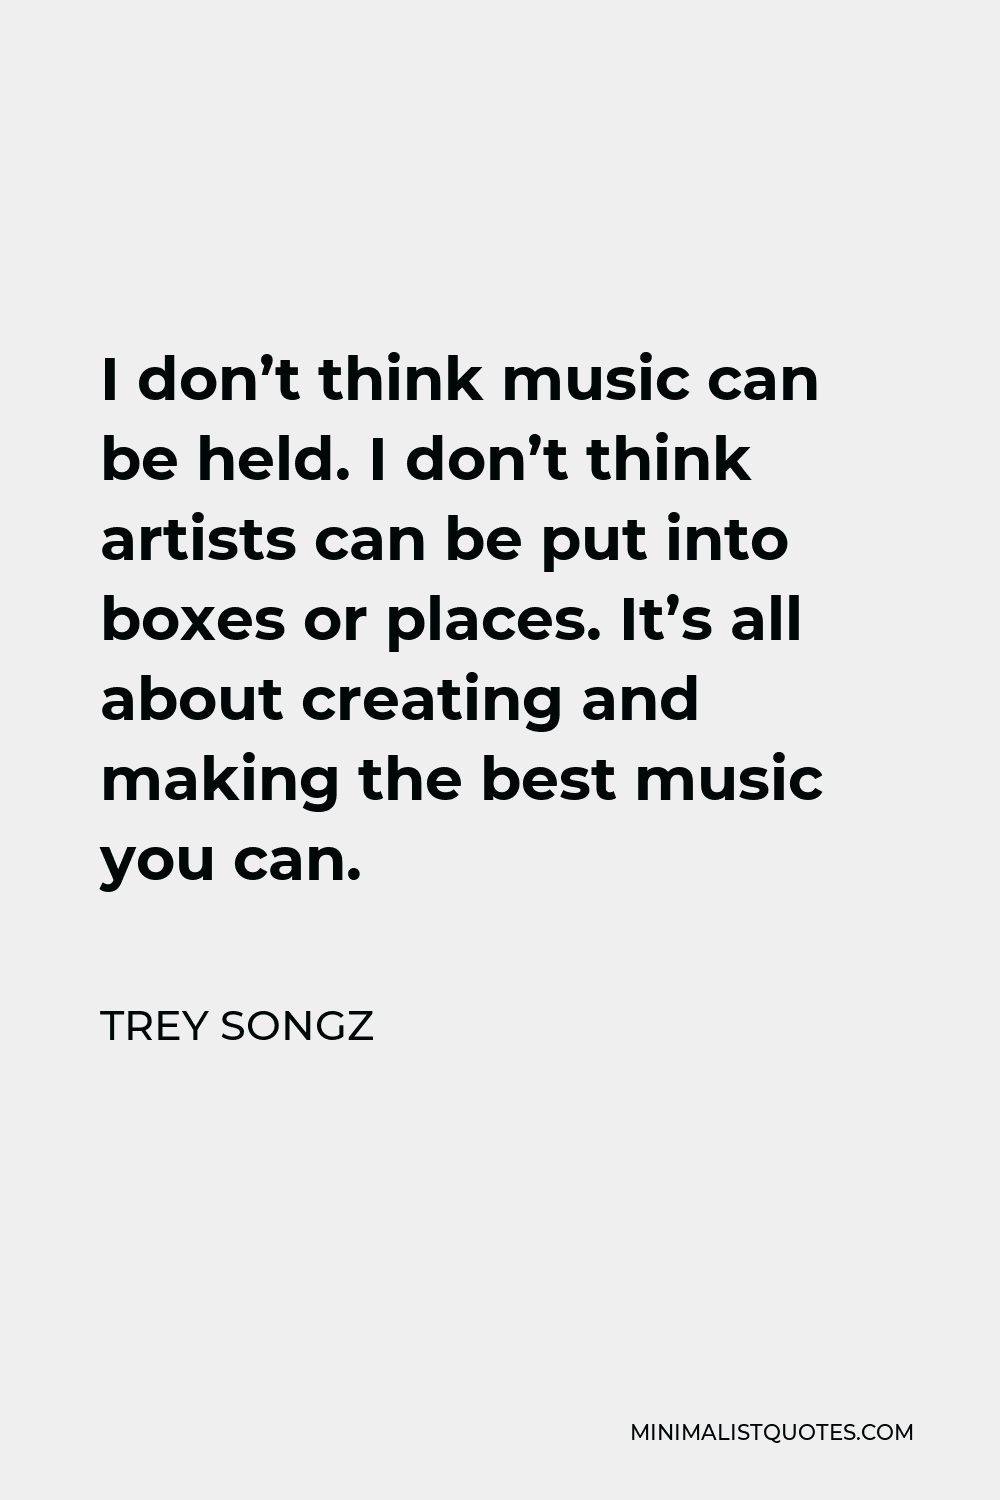 Trey Songz Quote - I don’t think music can be held. I don’t think artists can be put into boxes or places. It’s all about creating and making the best music you can.